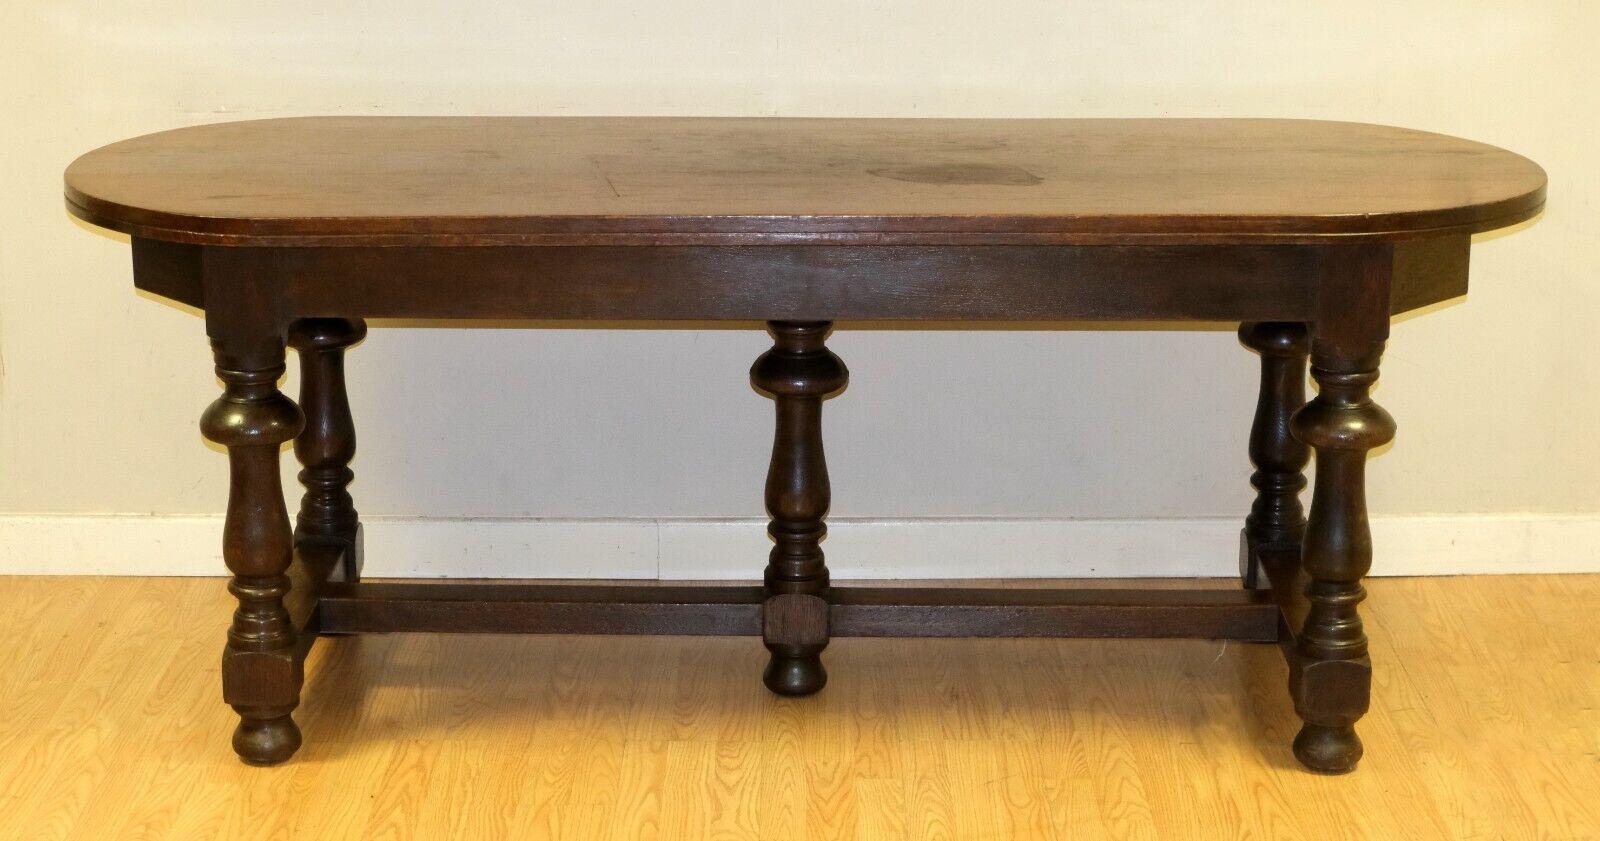 We are delighted to offer for sale this gorgeous 19th Century Oak Hall or Refectory dining table on beautifully decorated stretchers.

This lovely piece is risen on four turned legs and one in the middle for extra support, all joined on a thick